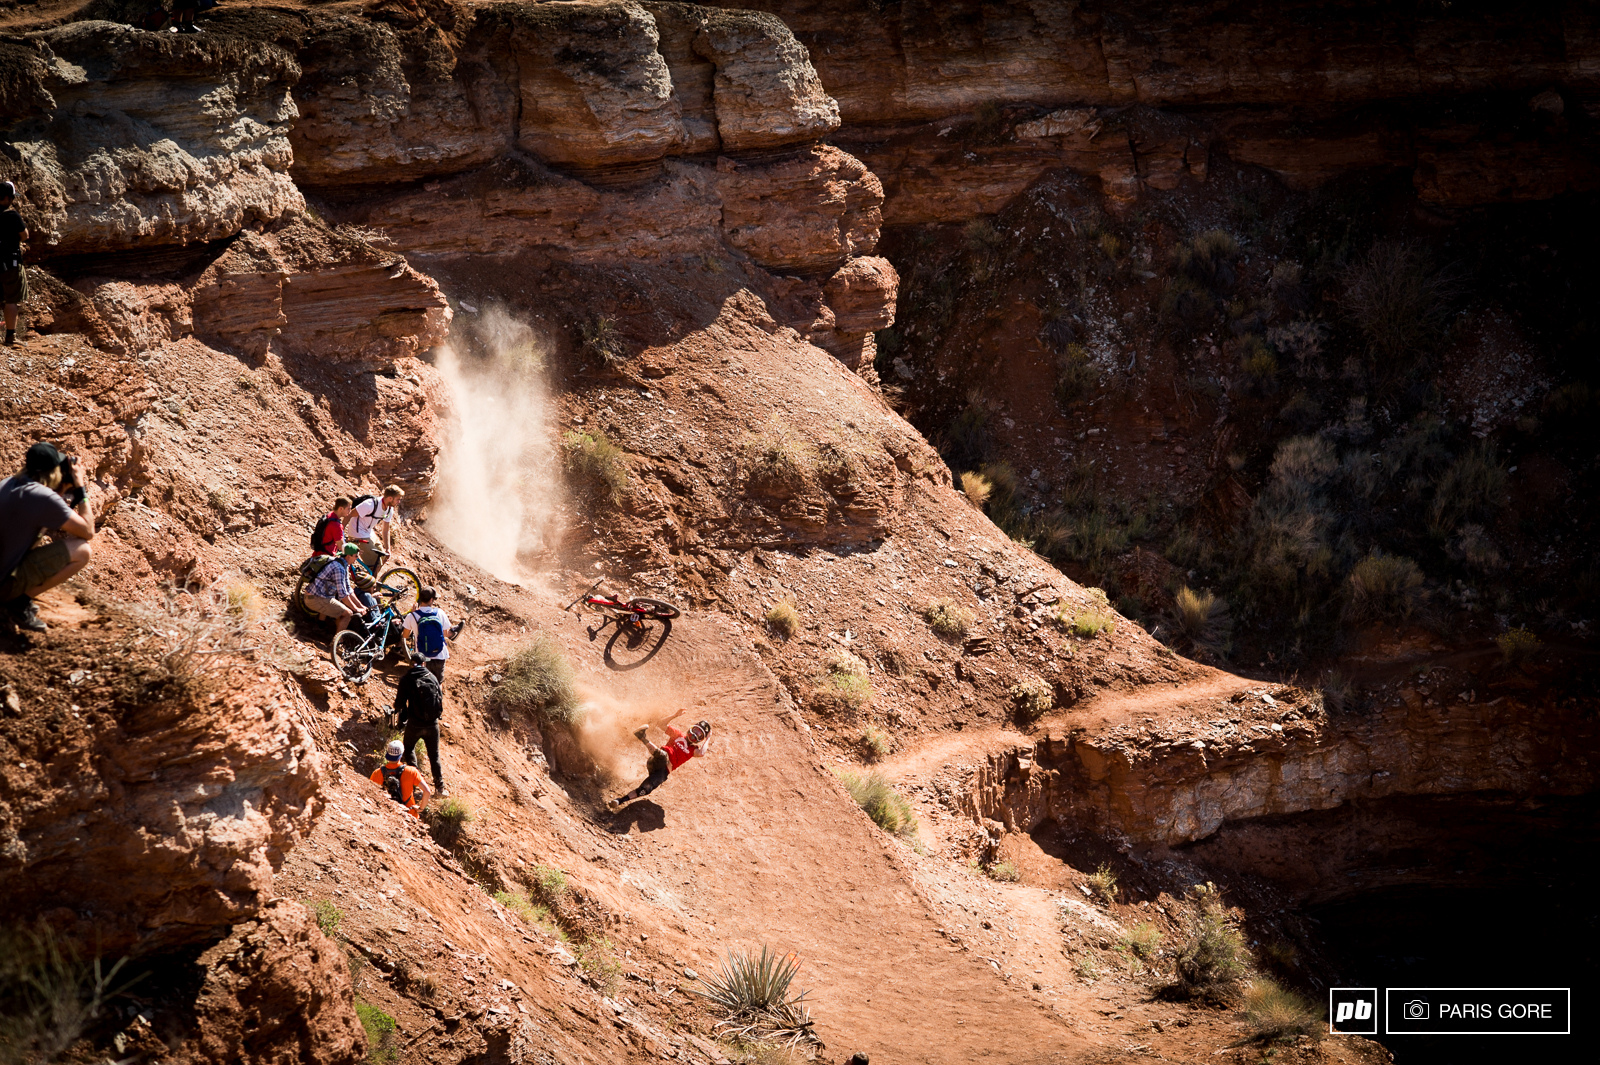 Mark Matthews busted off more rock than any pick axe has done this week at Rampage. He went down hard and has a broken femur. Carried off to Salt Lake, we are all bummed to see him go down like he did. Heal up soon Mark!